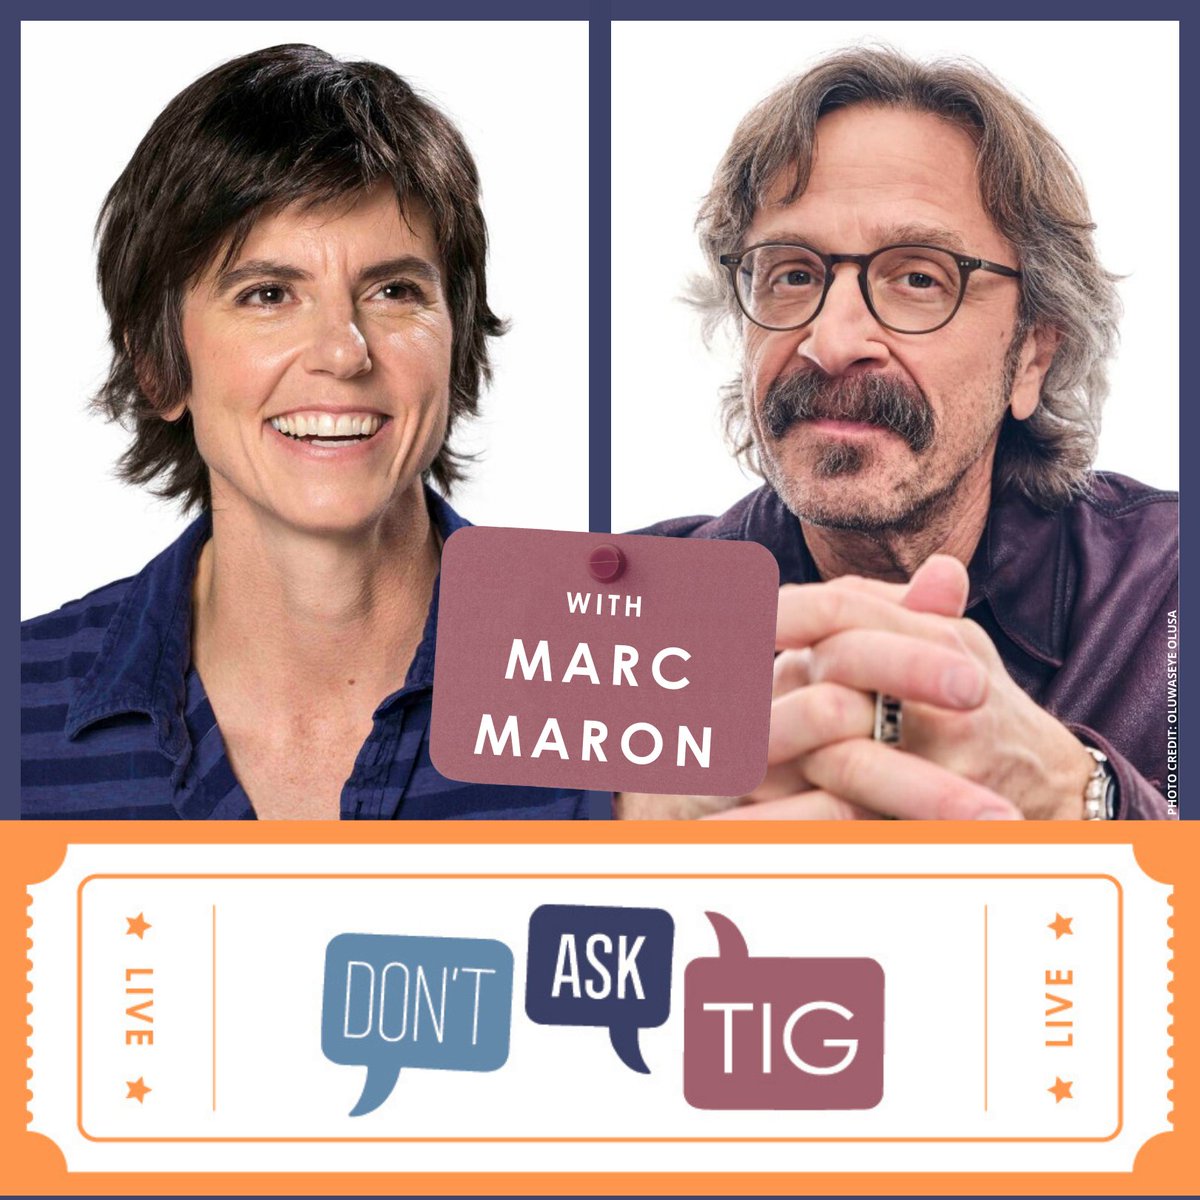 One week left to get your ticket! Join @TigNotaro and very special guest @marcmaron (@WTFpod) for a live virtual event on Monday 4/24 at 9pm ET / 6pm PT. We can’t promise good advice, but we can promise a good time — and a few special surprises! Tickets: support.americanpublicmedia.org/dontasktig-eve…